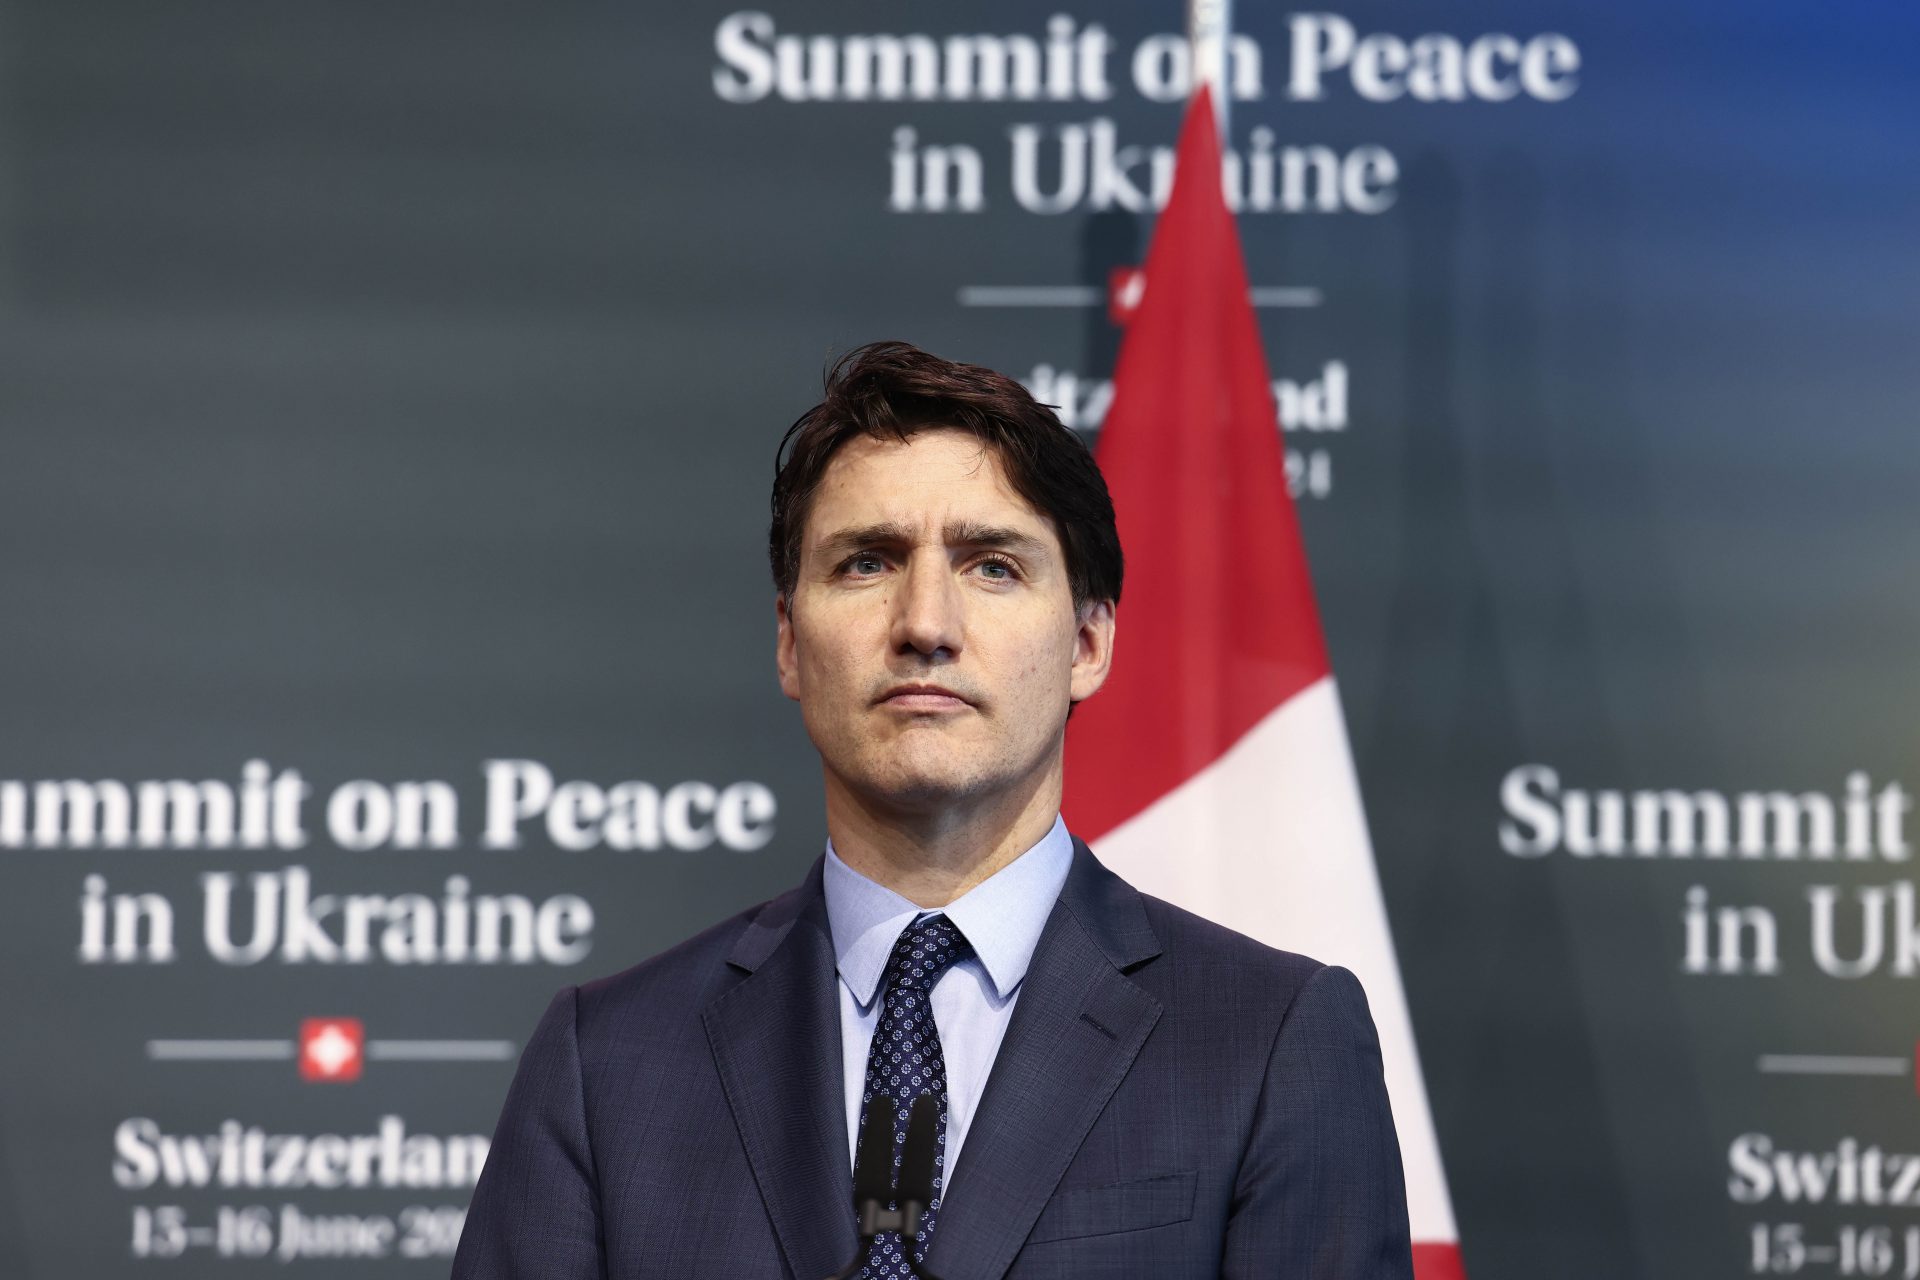 This is why Canadians think Trudeau wants to stay on as Prime Minister